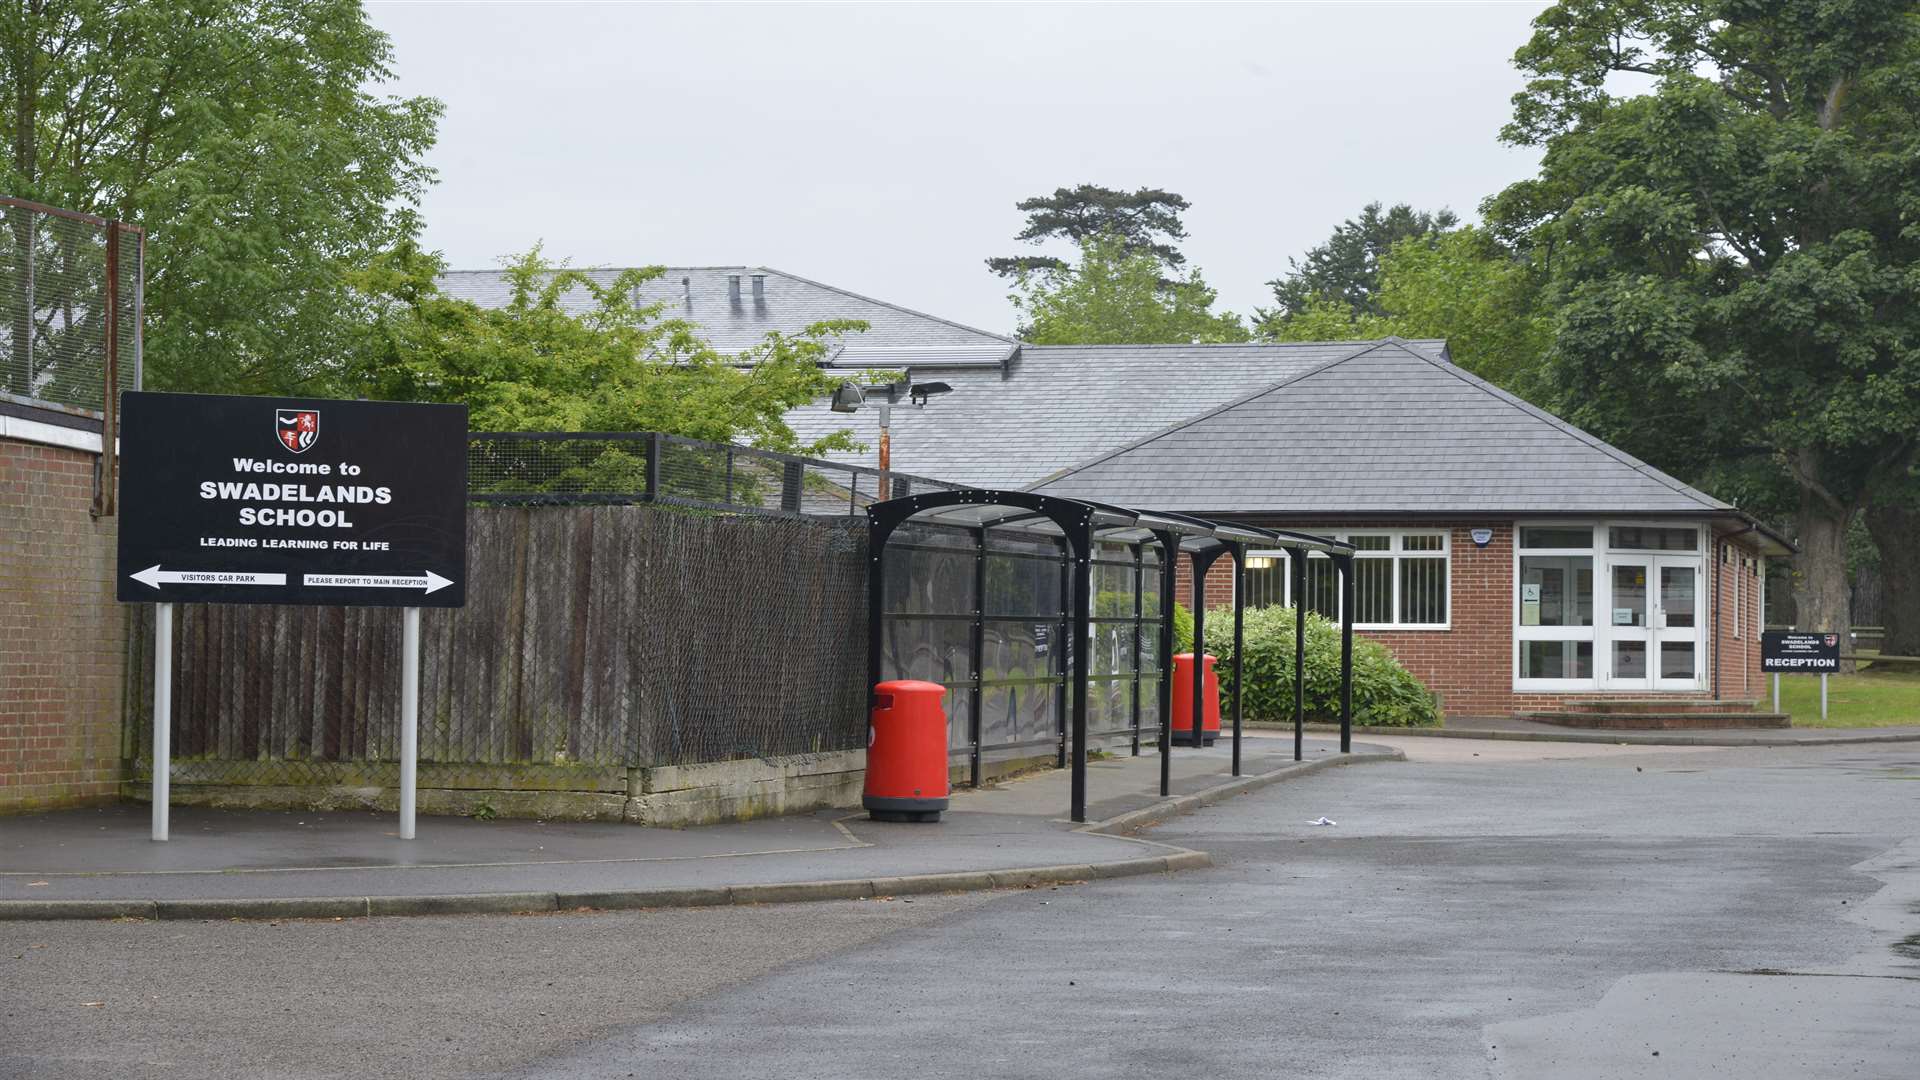 Over 20 students were sent home or picked up from Swadelands School following uniform breaches